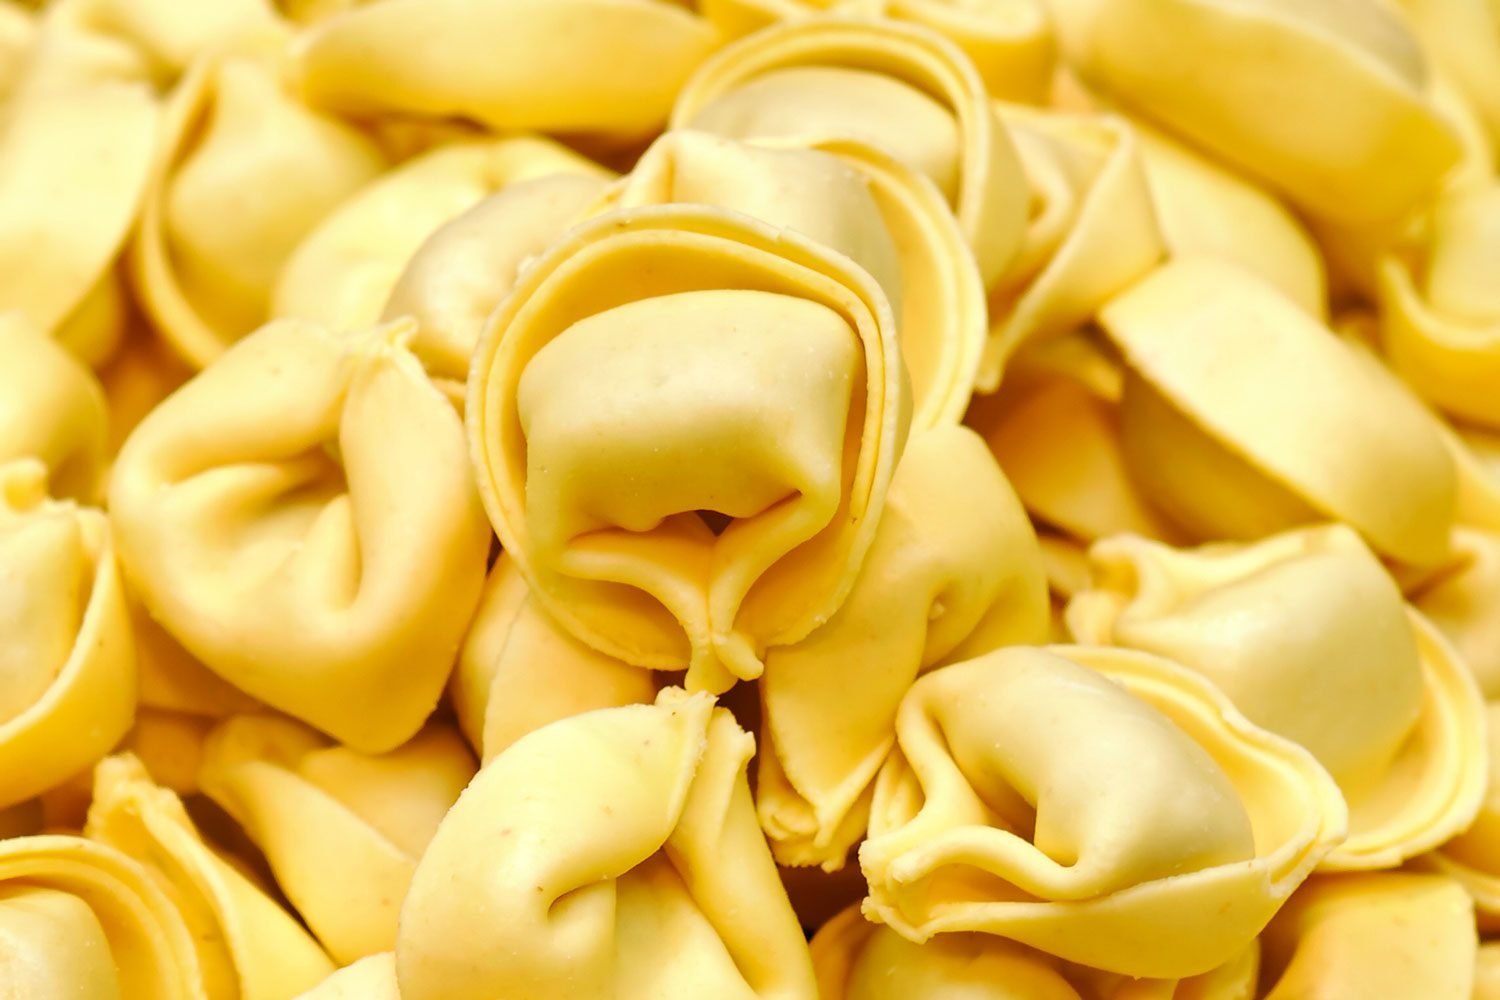 More Than 4,500 Pounds of a Popular Pasta Brand Are Being Recalled